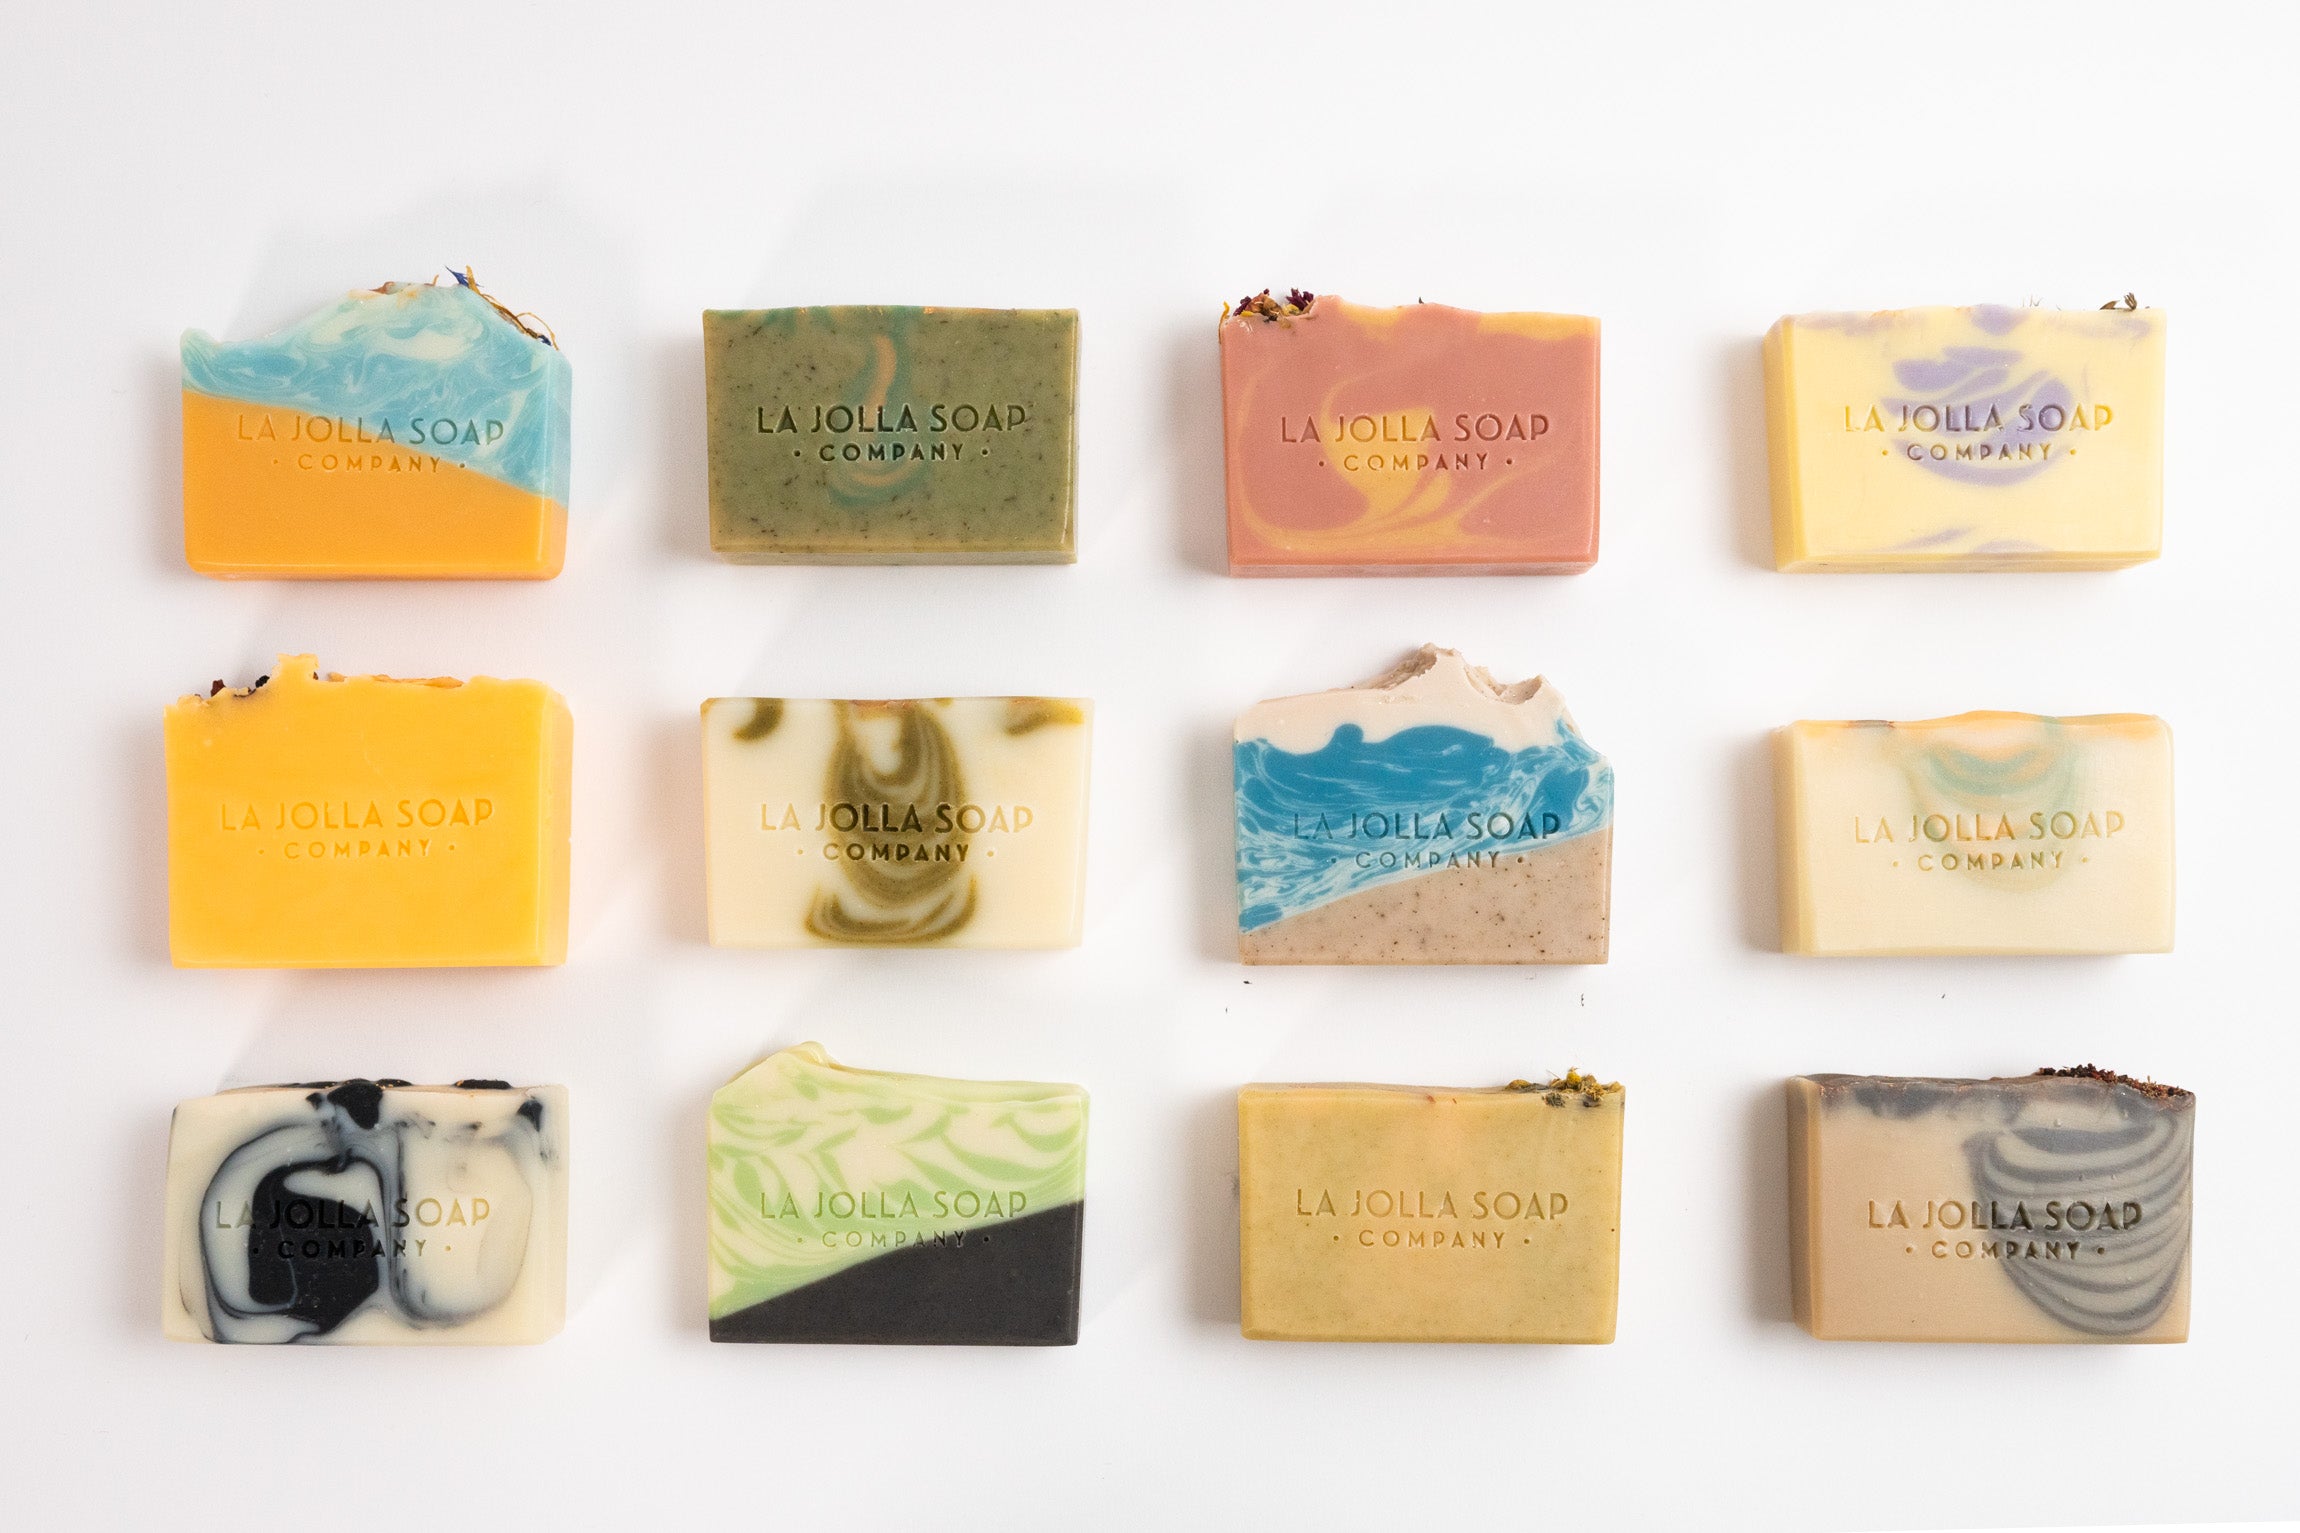 Find out about new arrivals and specials at La Jolla Soap Company! sign up for notifications.